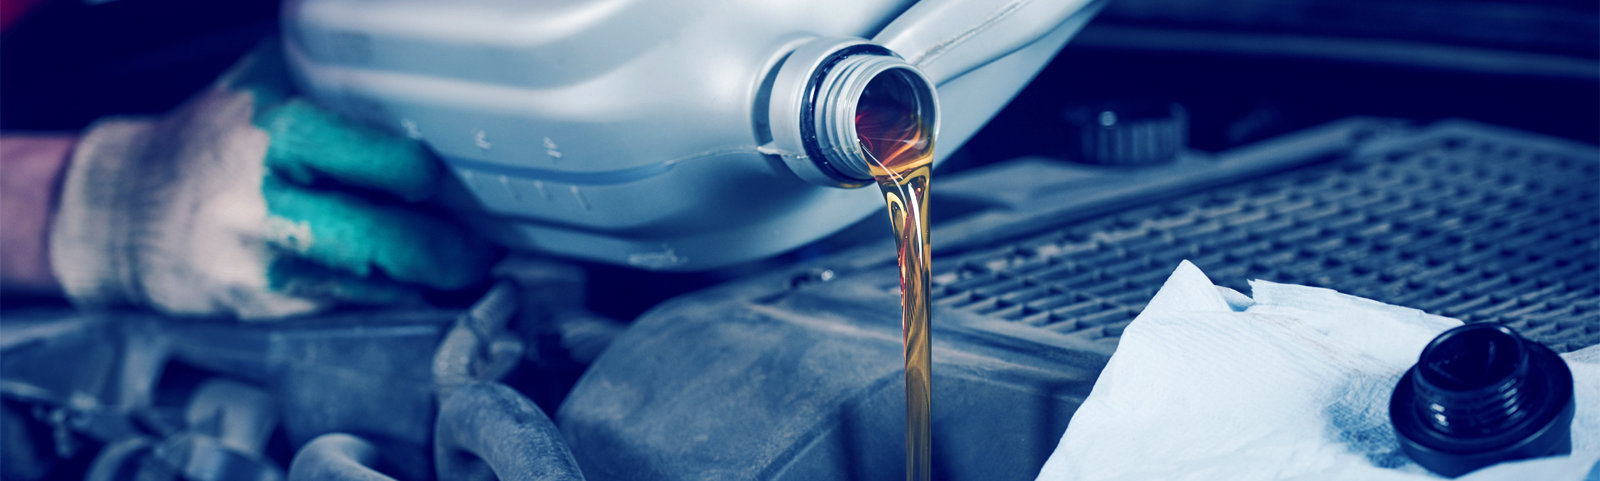 Mechanic pouring oil into a vehicle - Car Servicing Newcastle Upon Tyne